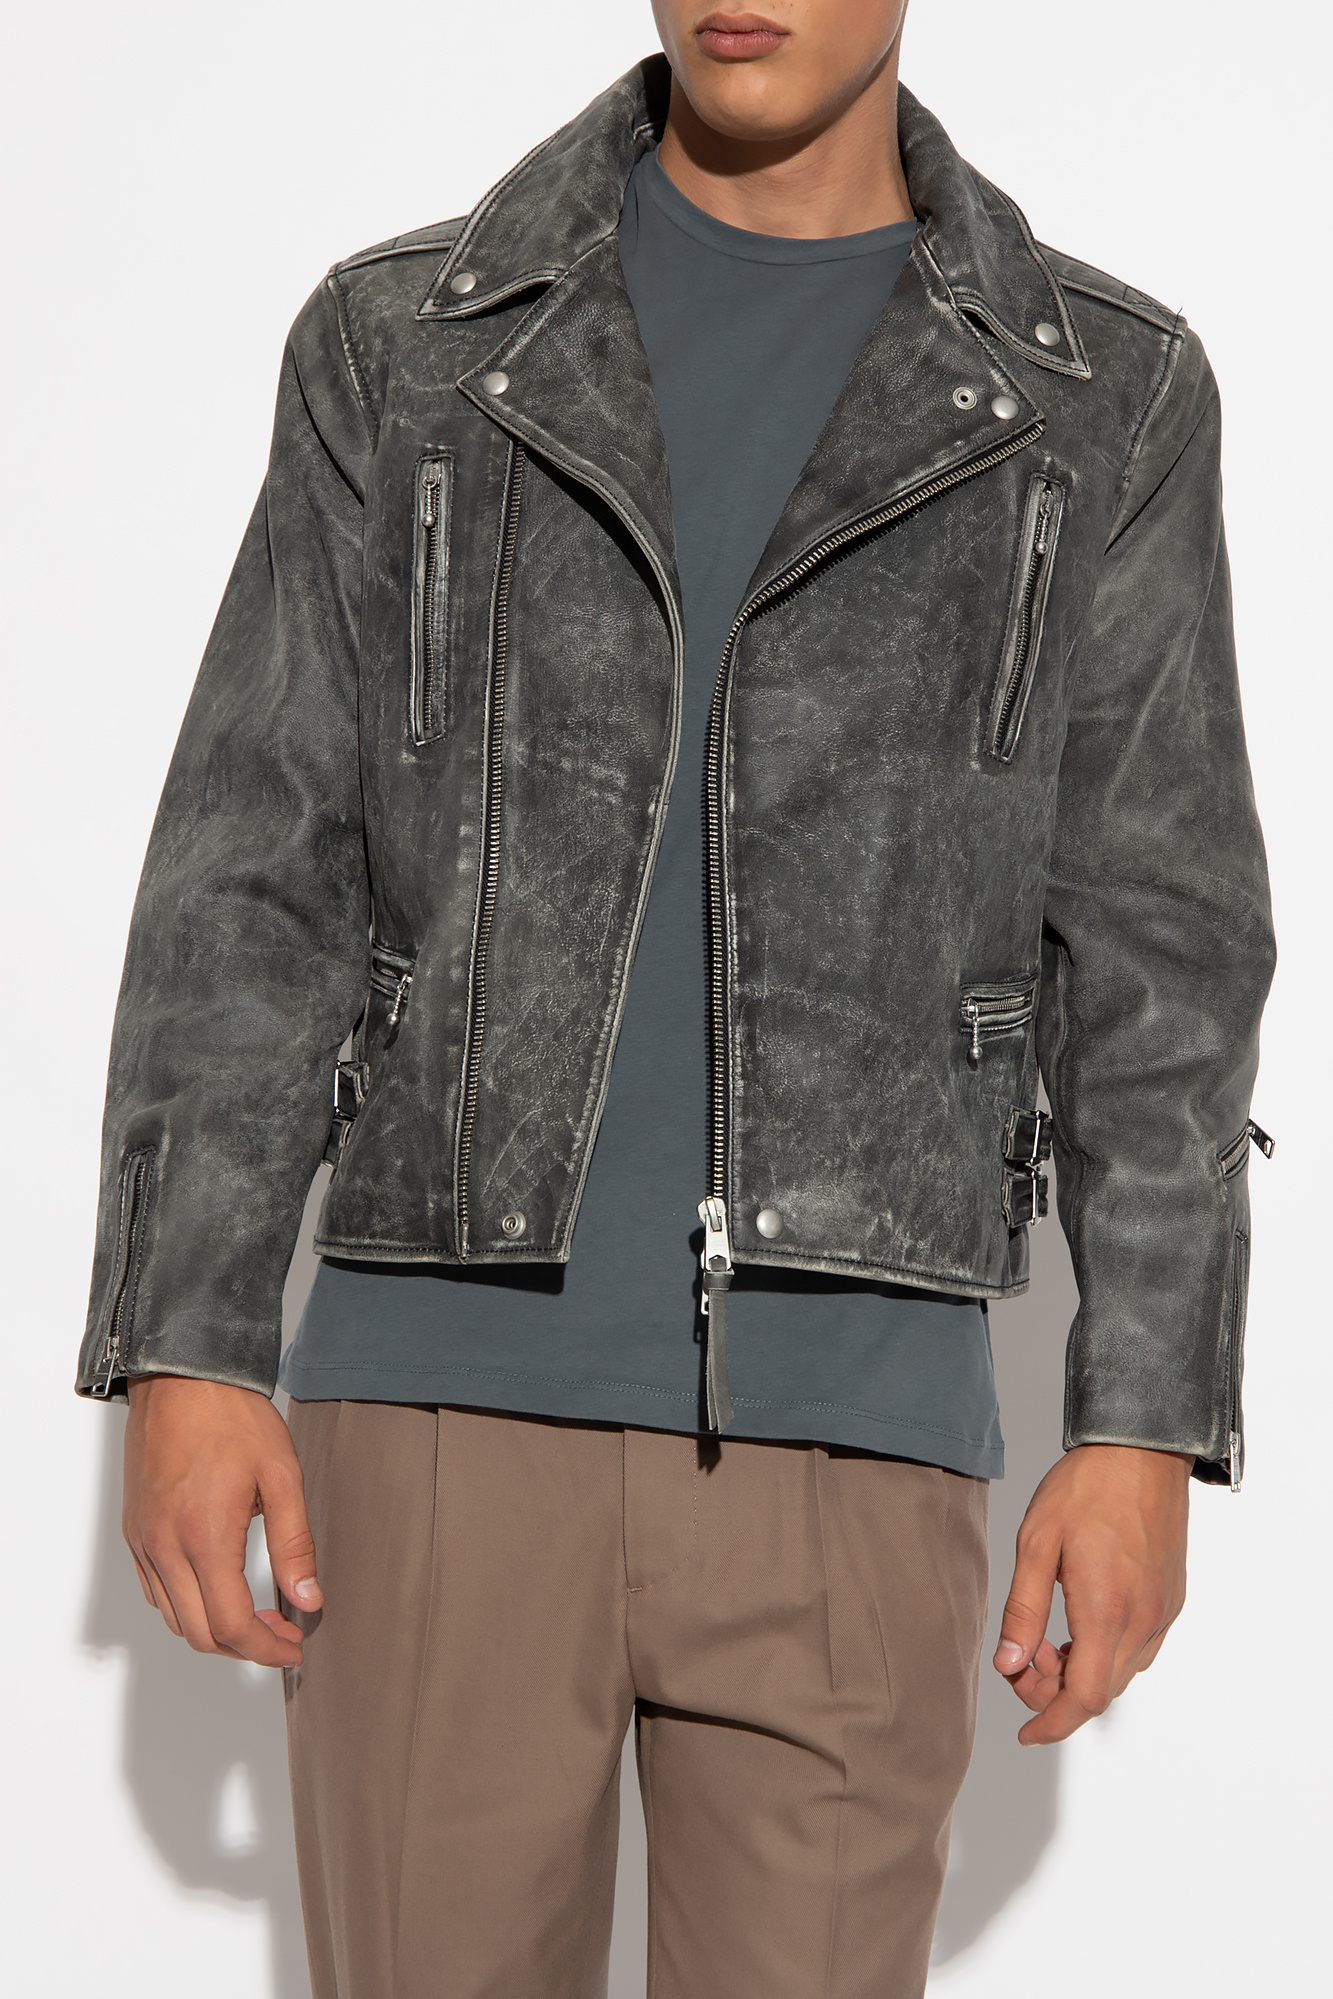 LOUIS VUITTON Size 44 Grey Suede Leather Zip Up Jacket For Sale at